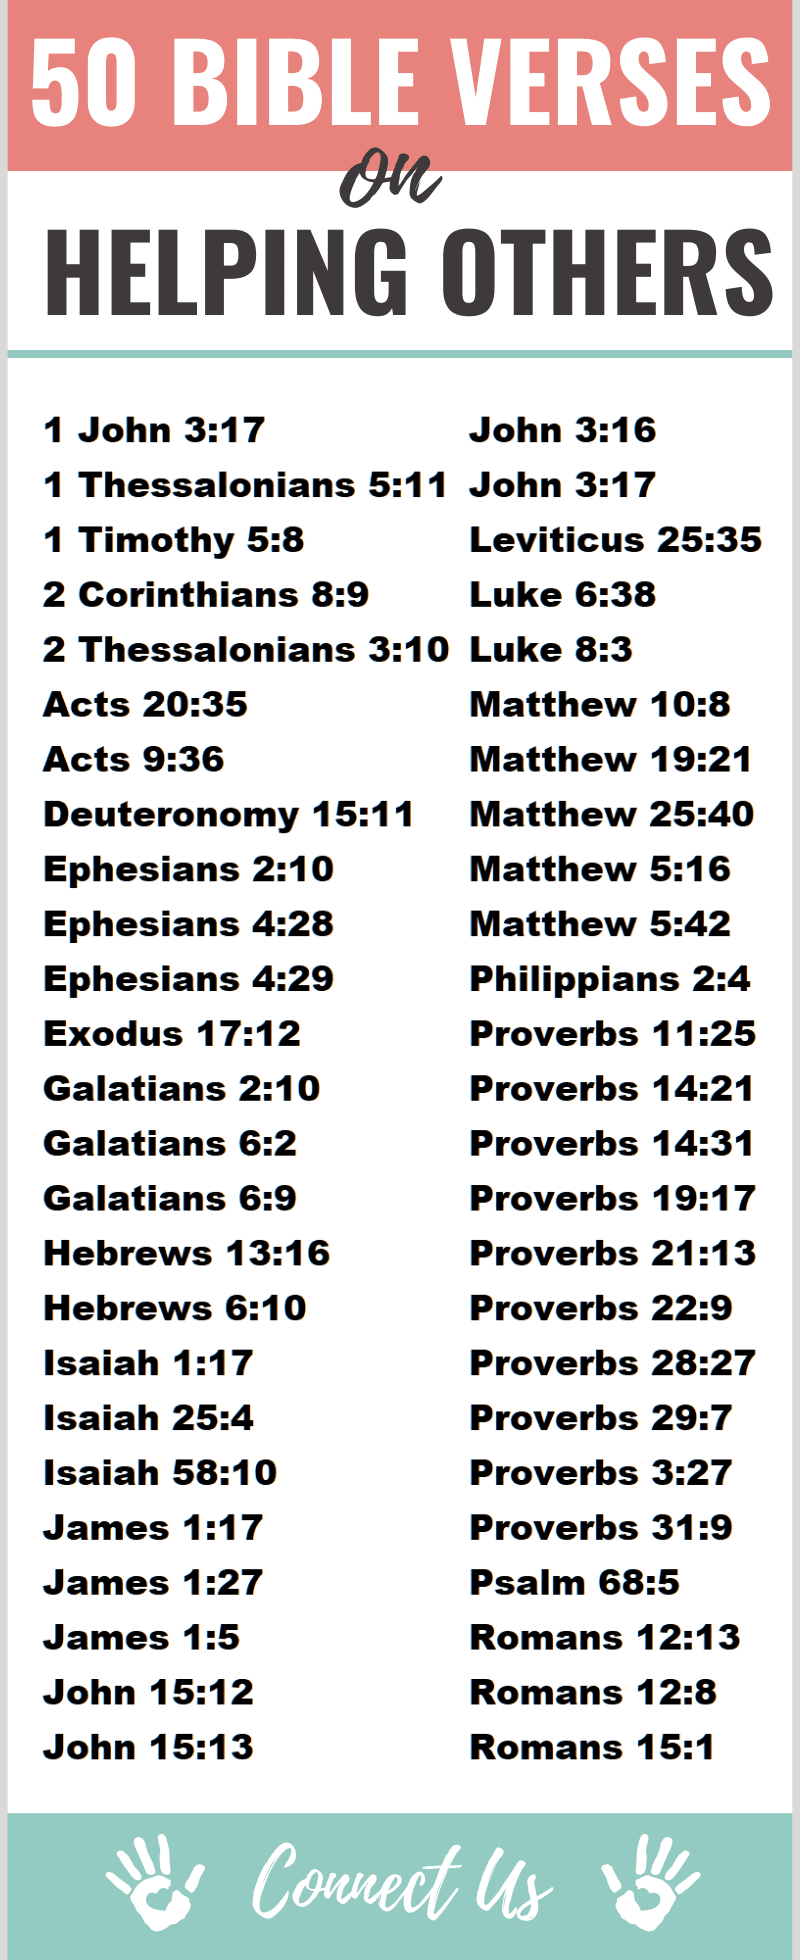 Bible Verses on Helping Others